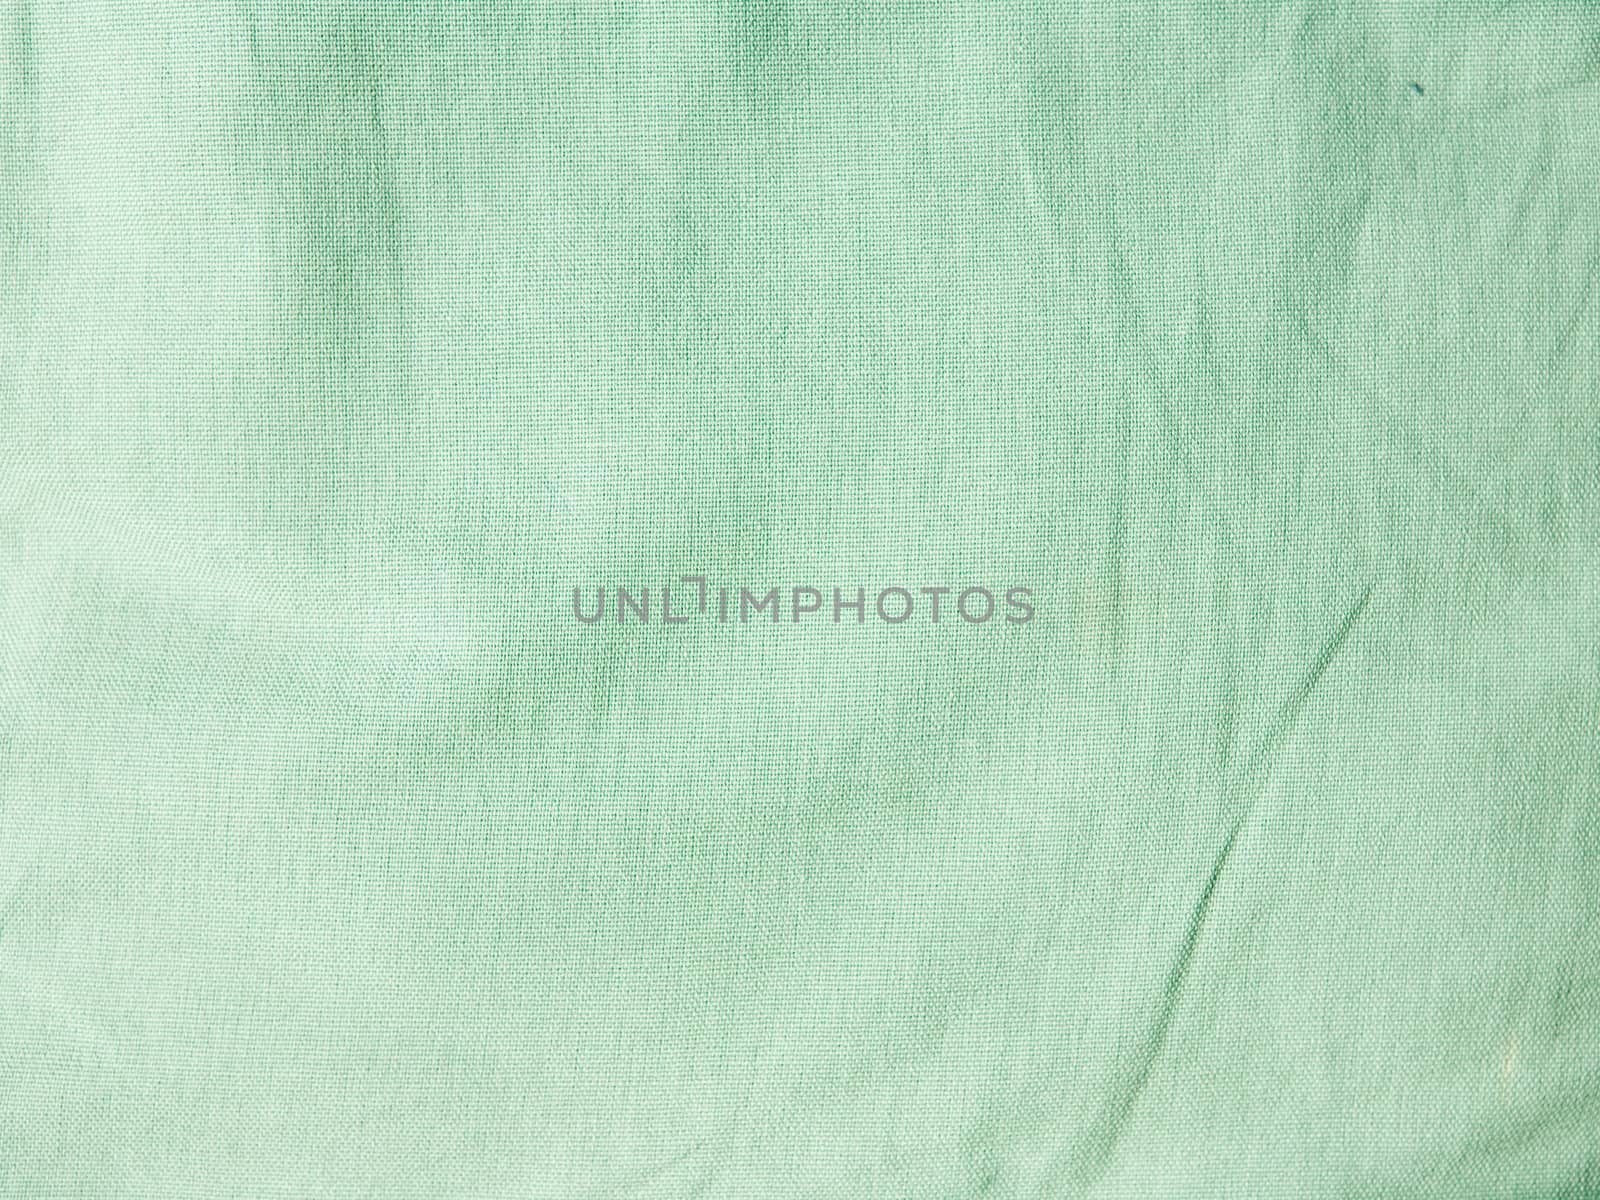 Green wrinkled fabric texture